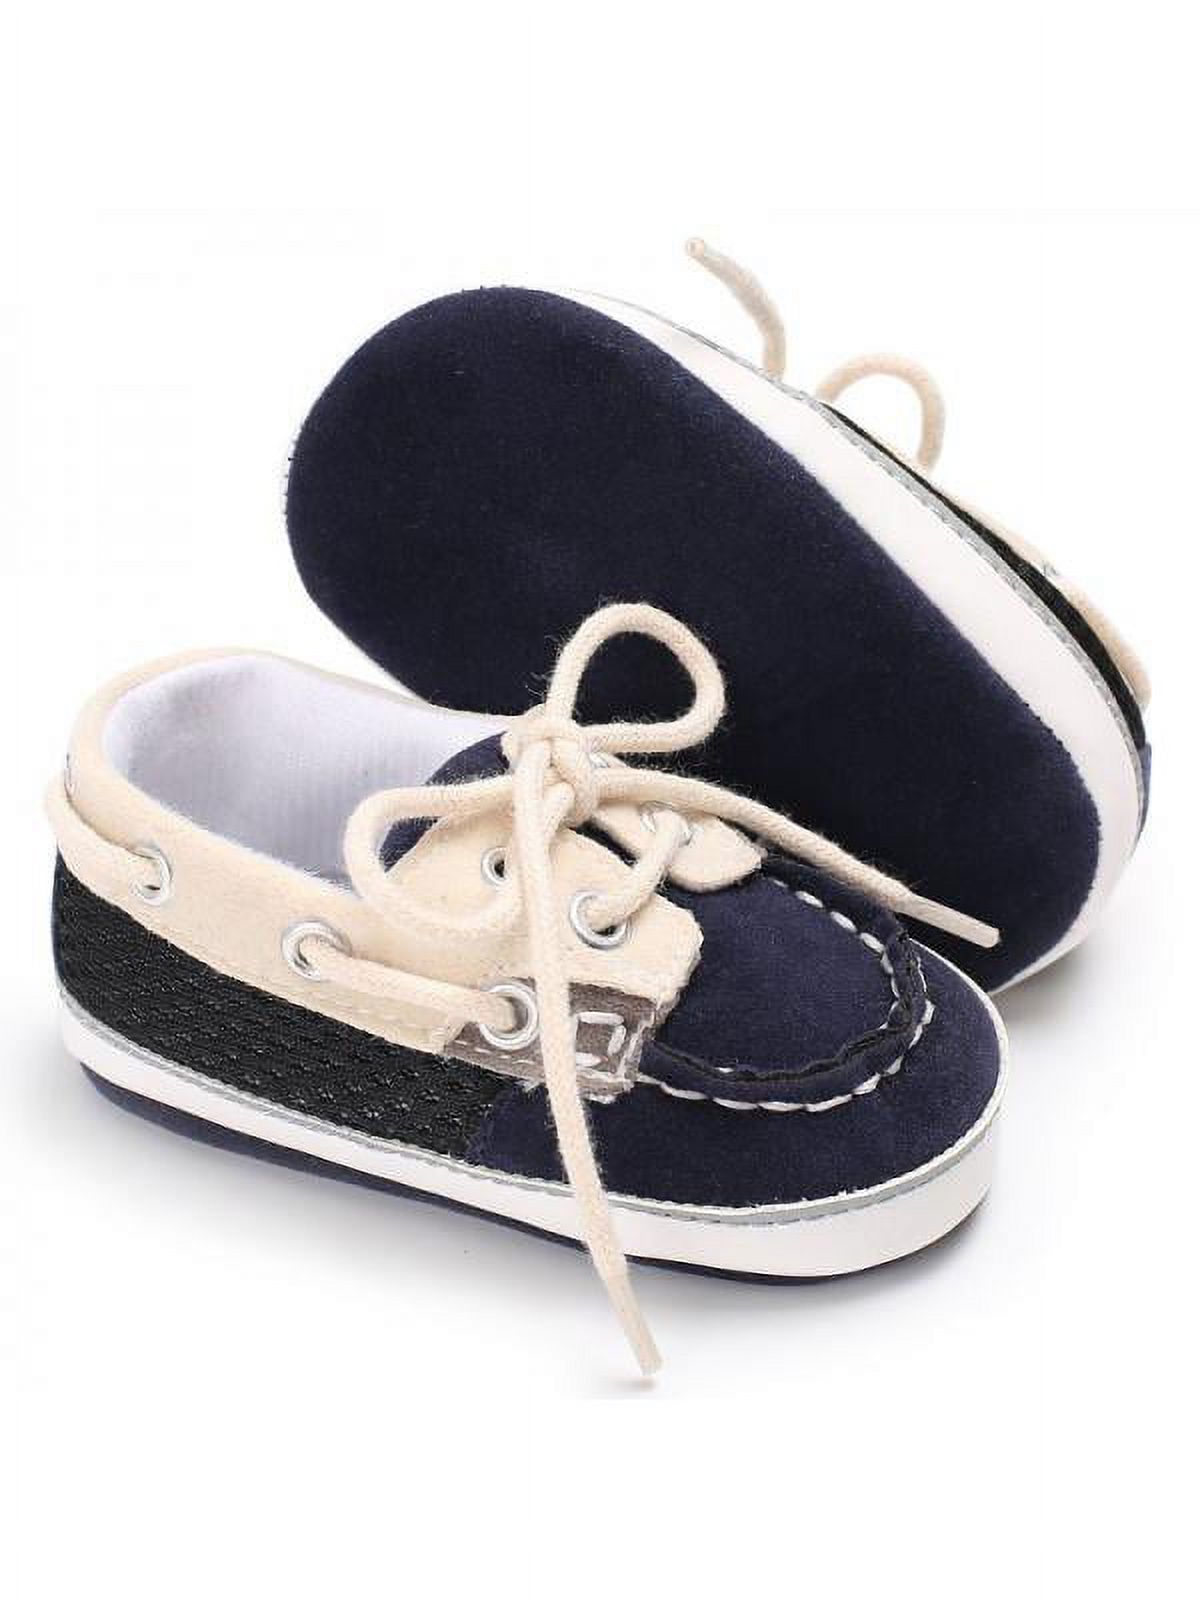 Baby Boy Casual Shoes Toddler Infant Sneaker Soft Sole Crib Shoes - image 3 of 11